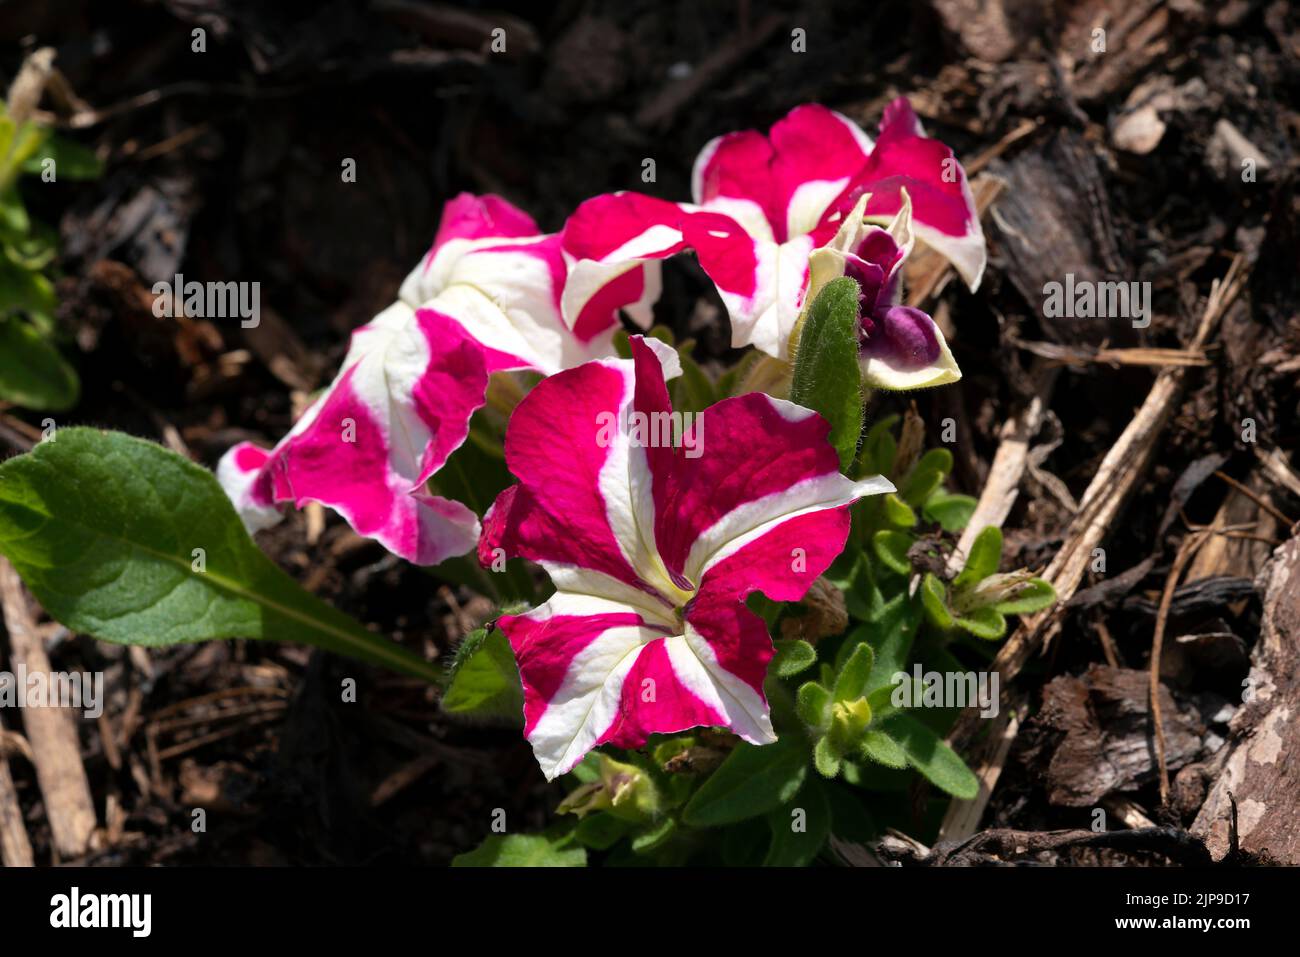 Petunia x hybrida 'Rose Star' a summer flowering annual plant with a red white summertime flower, stock photo image Stock Photo